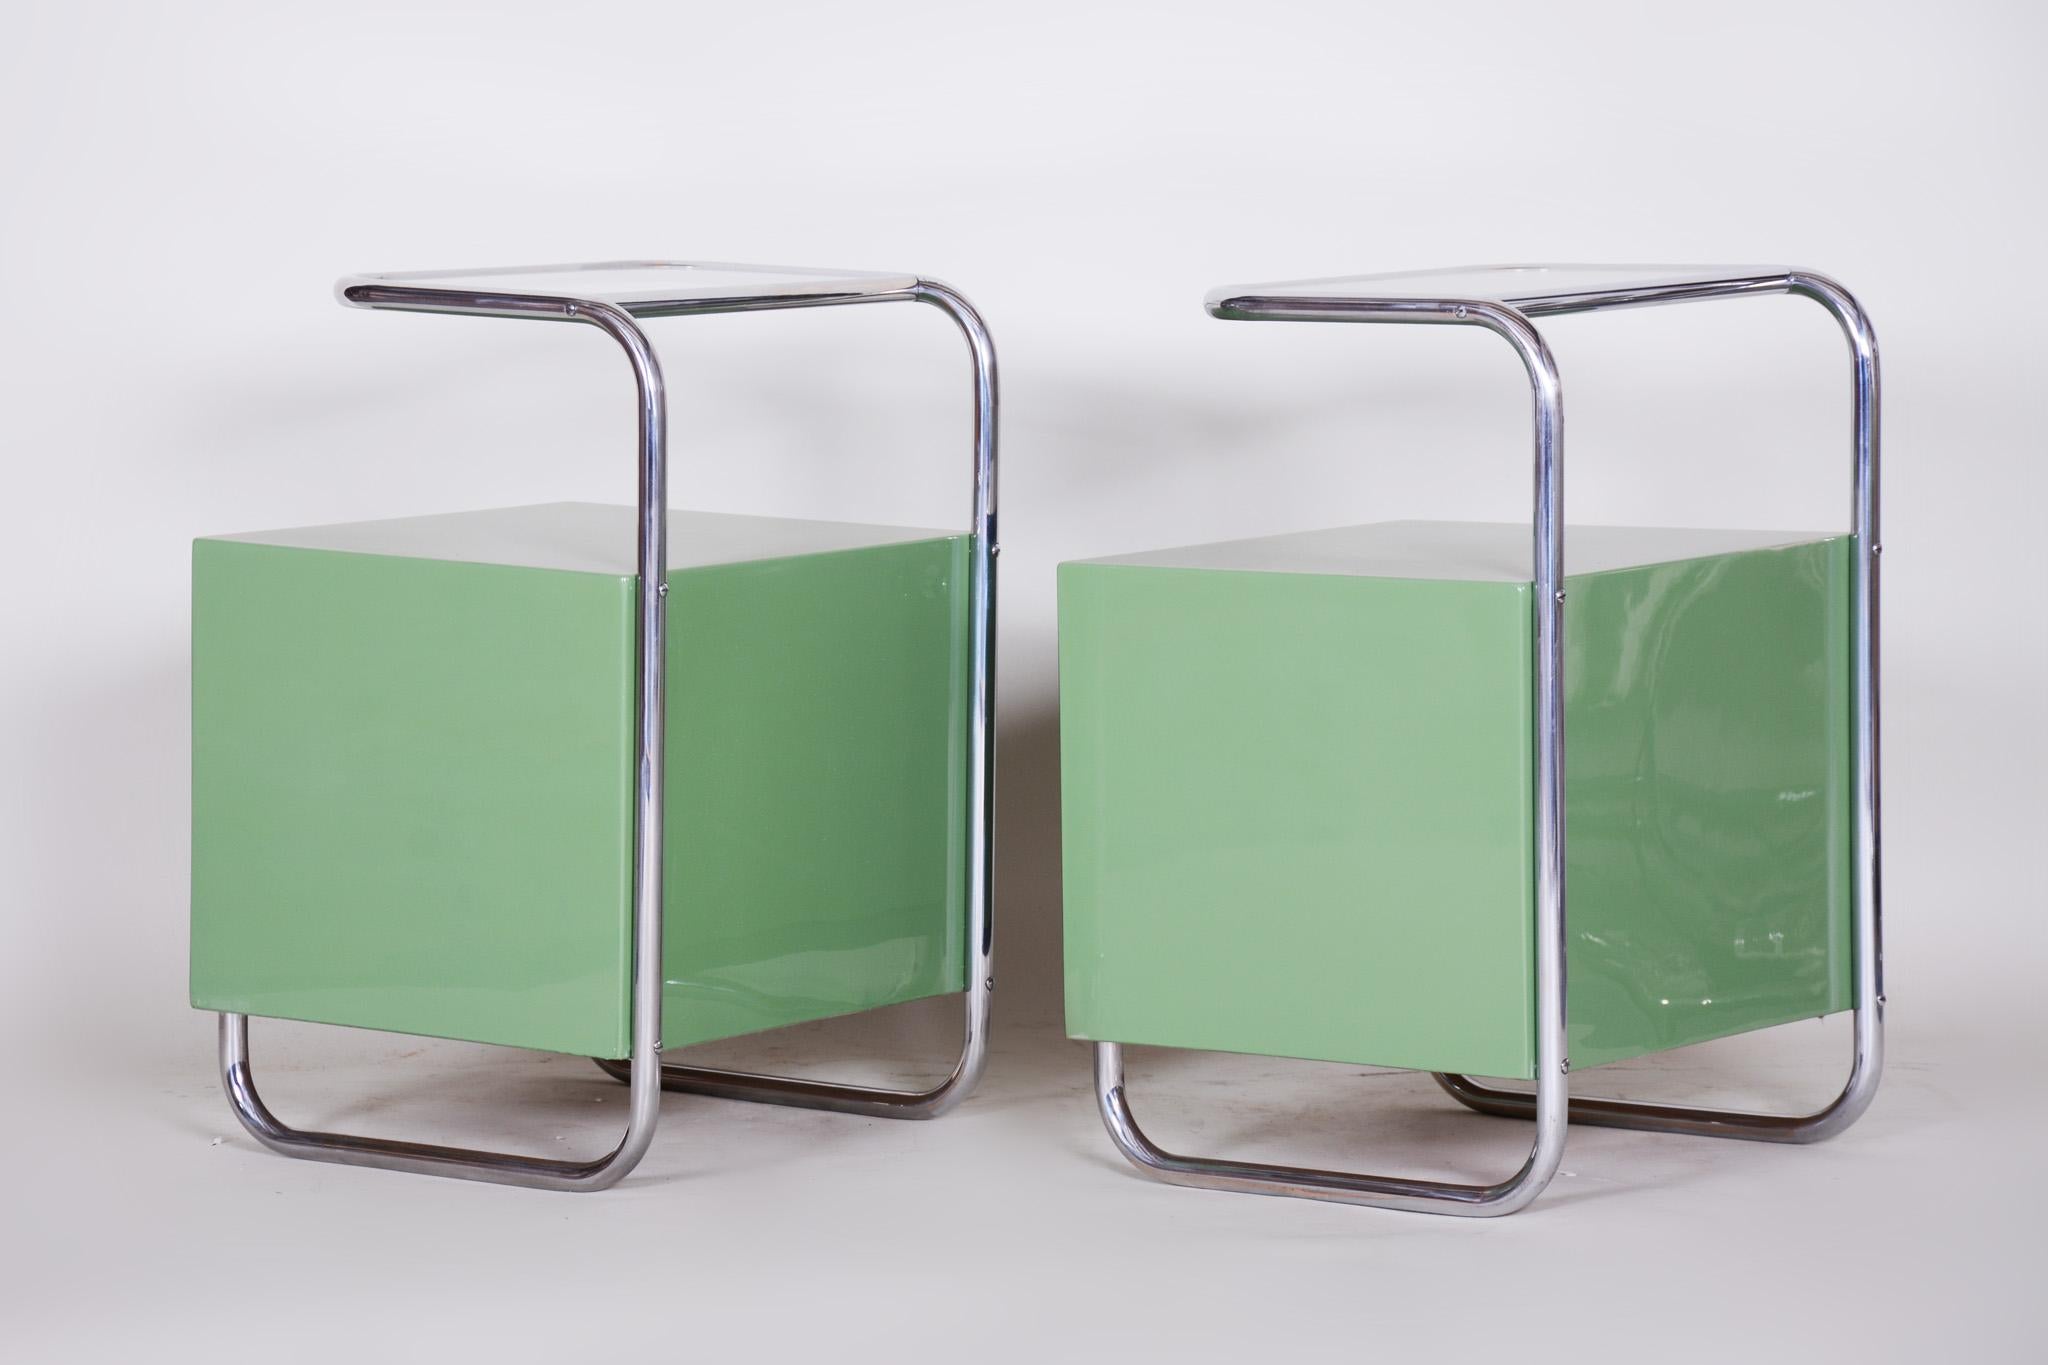 Pair of Green Vintage Bauhaus Bed Side Tables, Vichr, 1930s Glass Removable Desk 4